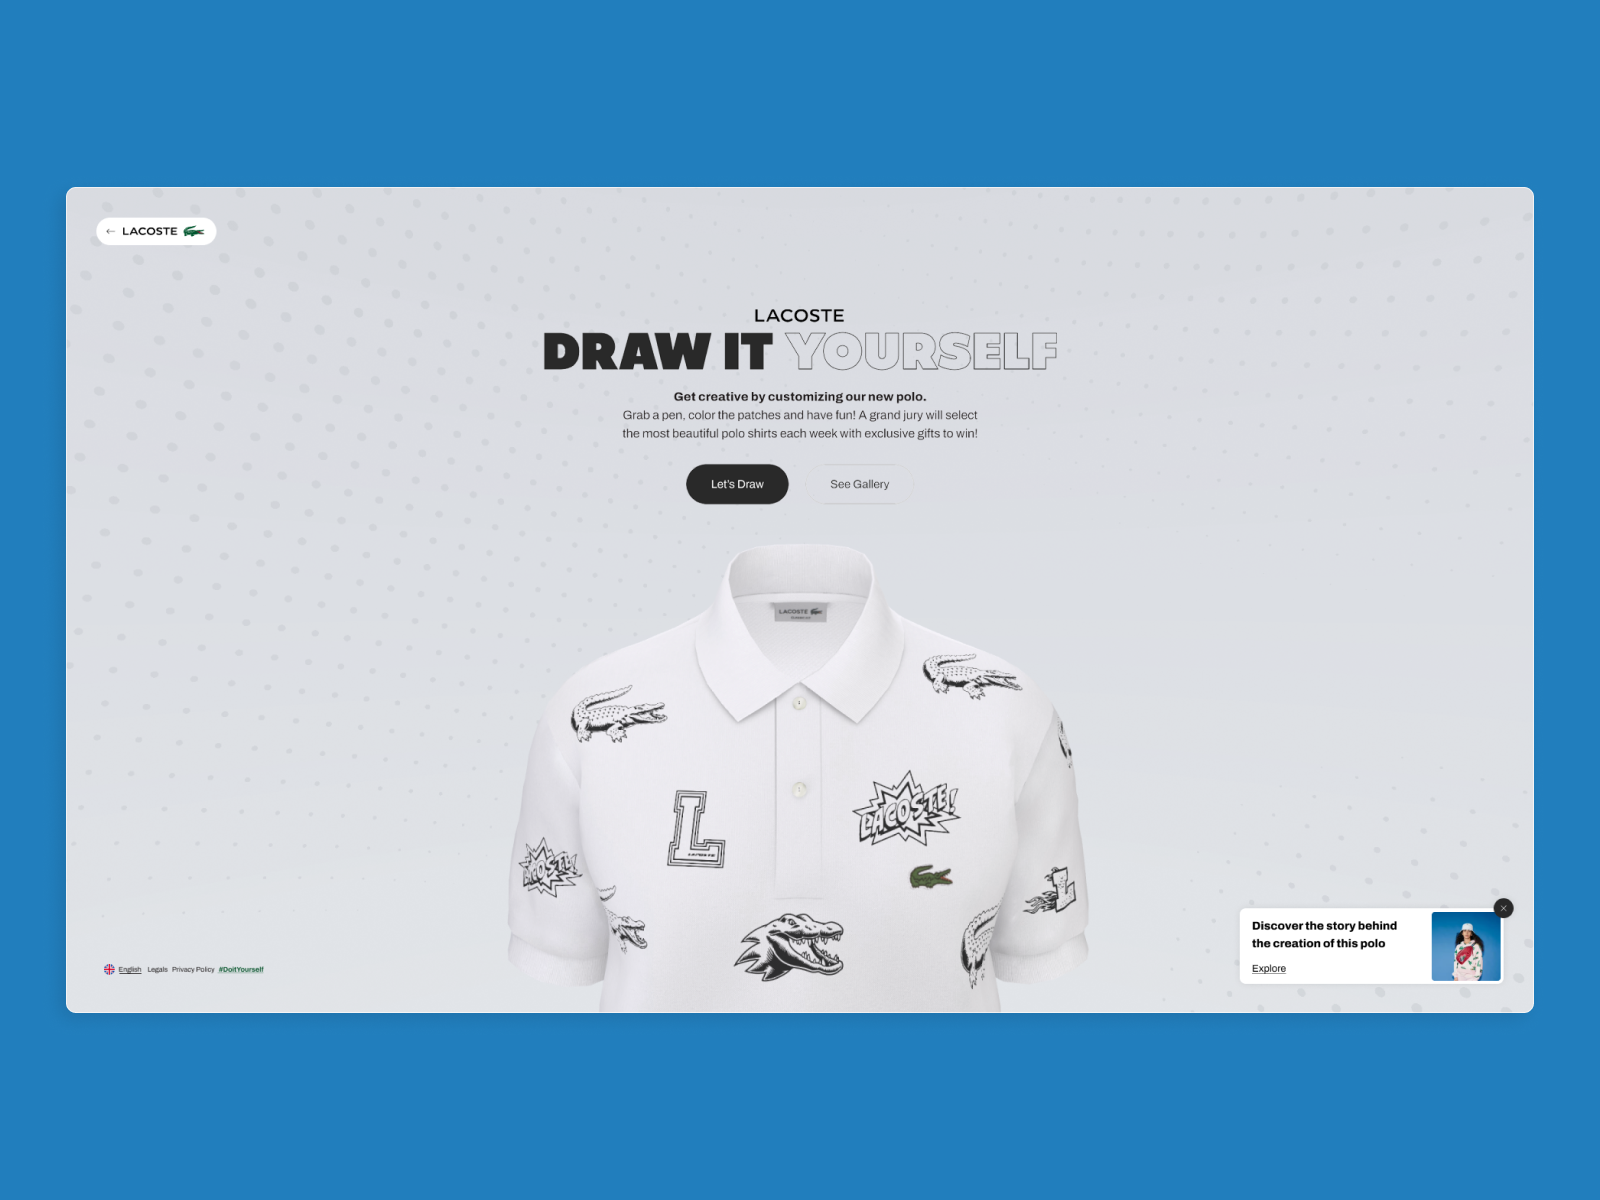 Lacoste - Draw It Yourself